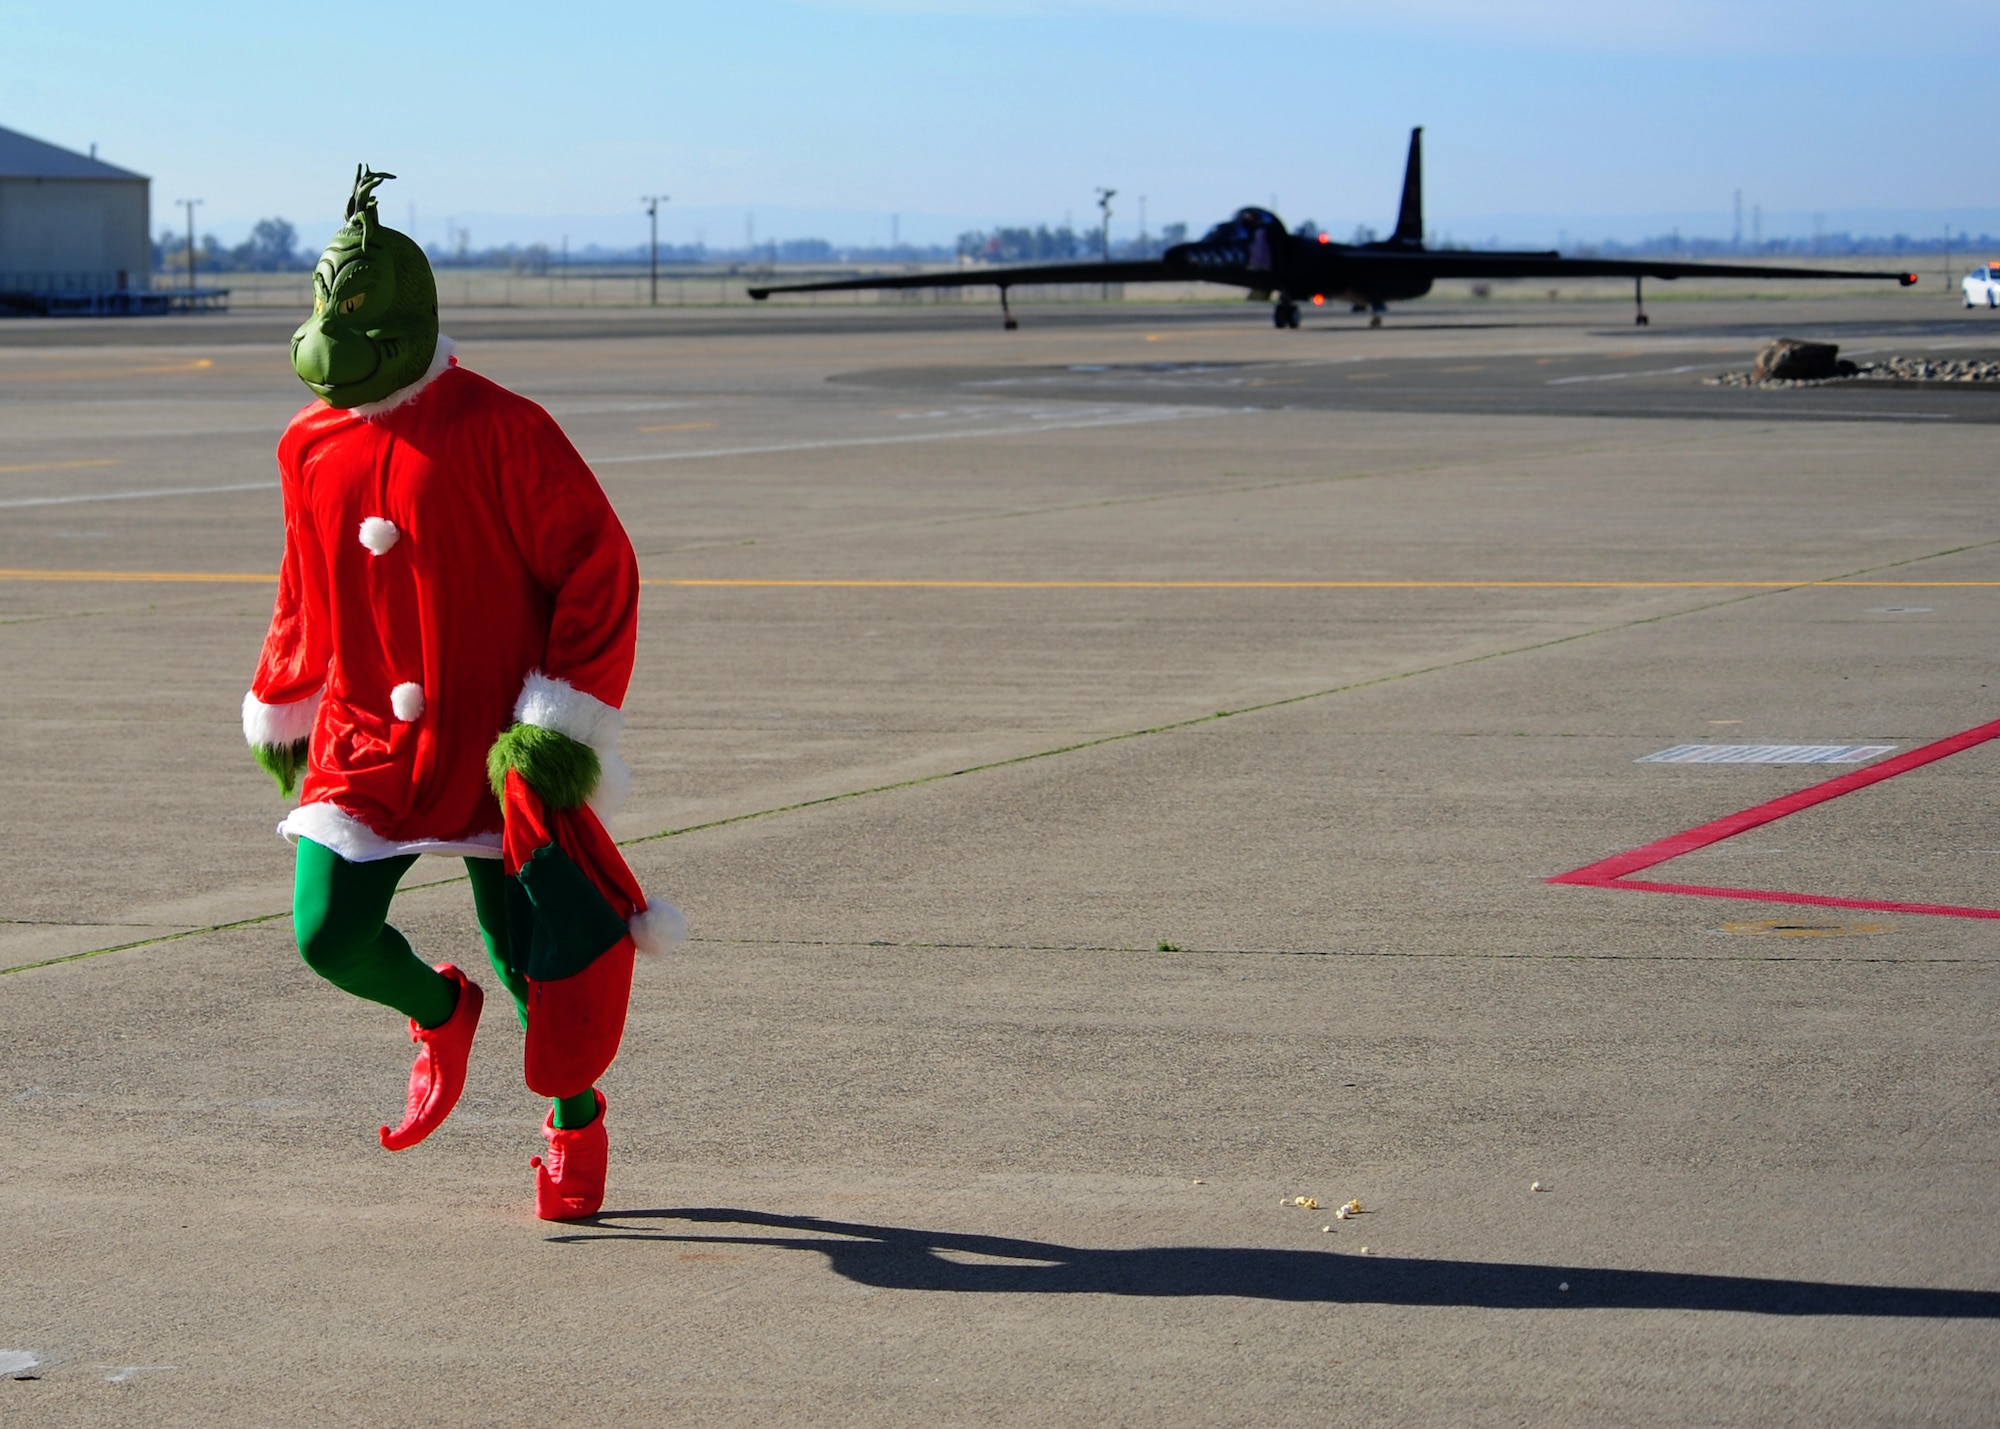 The Grinch runs away as Santa Claus taxis into Dock 6 riding in a themed U-2 Dragon Lady for the Children's Holiday Party Dec. 8, 2012, at Beale Air Force Base, Calif. After exiting the aircraft painted with holiday nose art, Beale youths excitedly surrounded St. Nick. (U.S. Air Force photo by Senior Airman Shawn Nickel/Released)